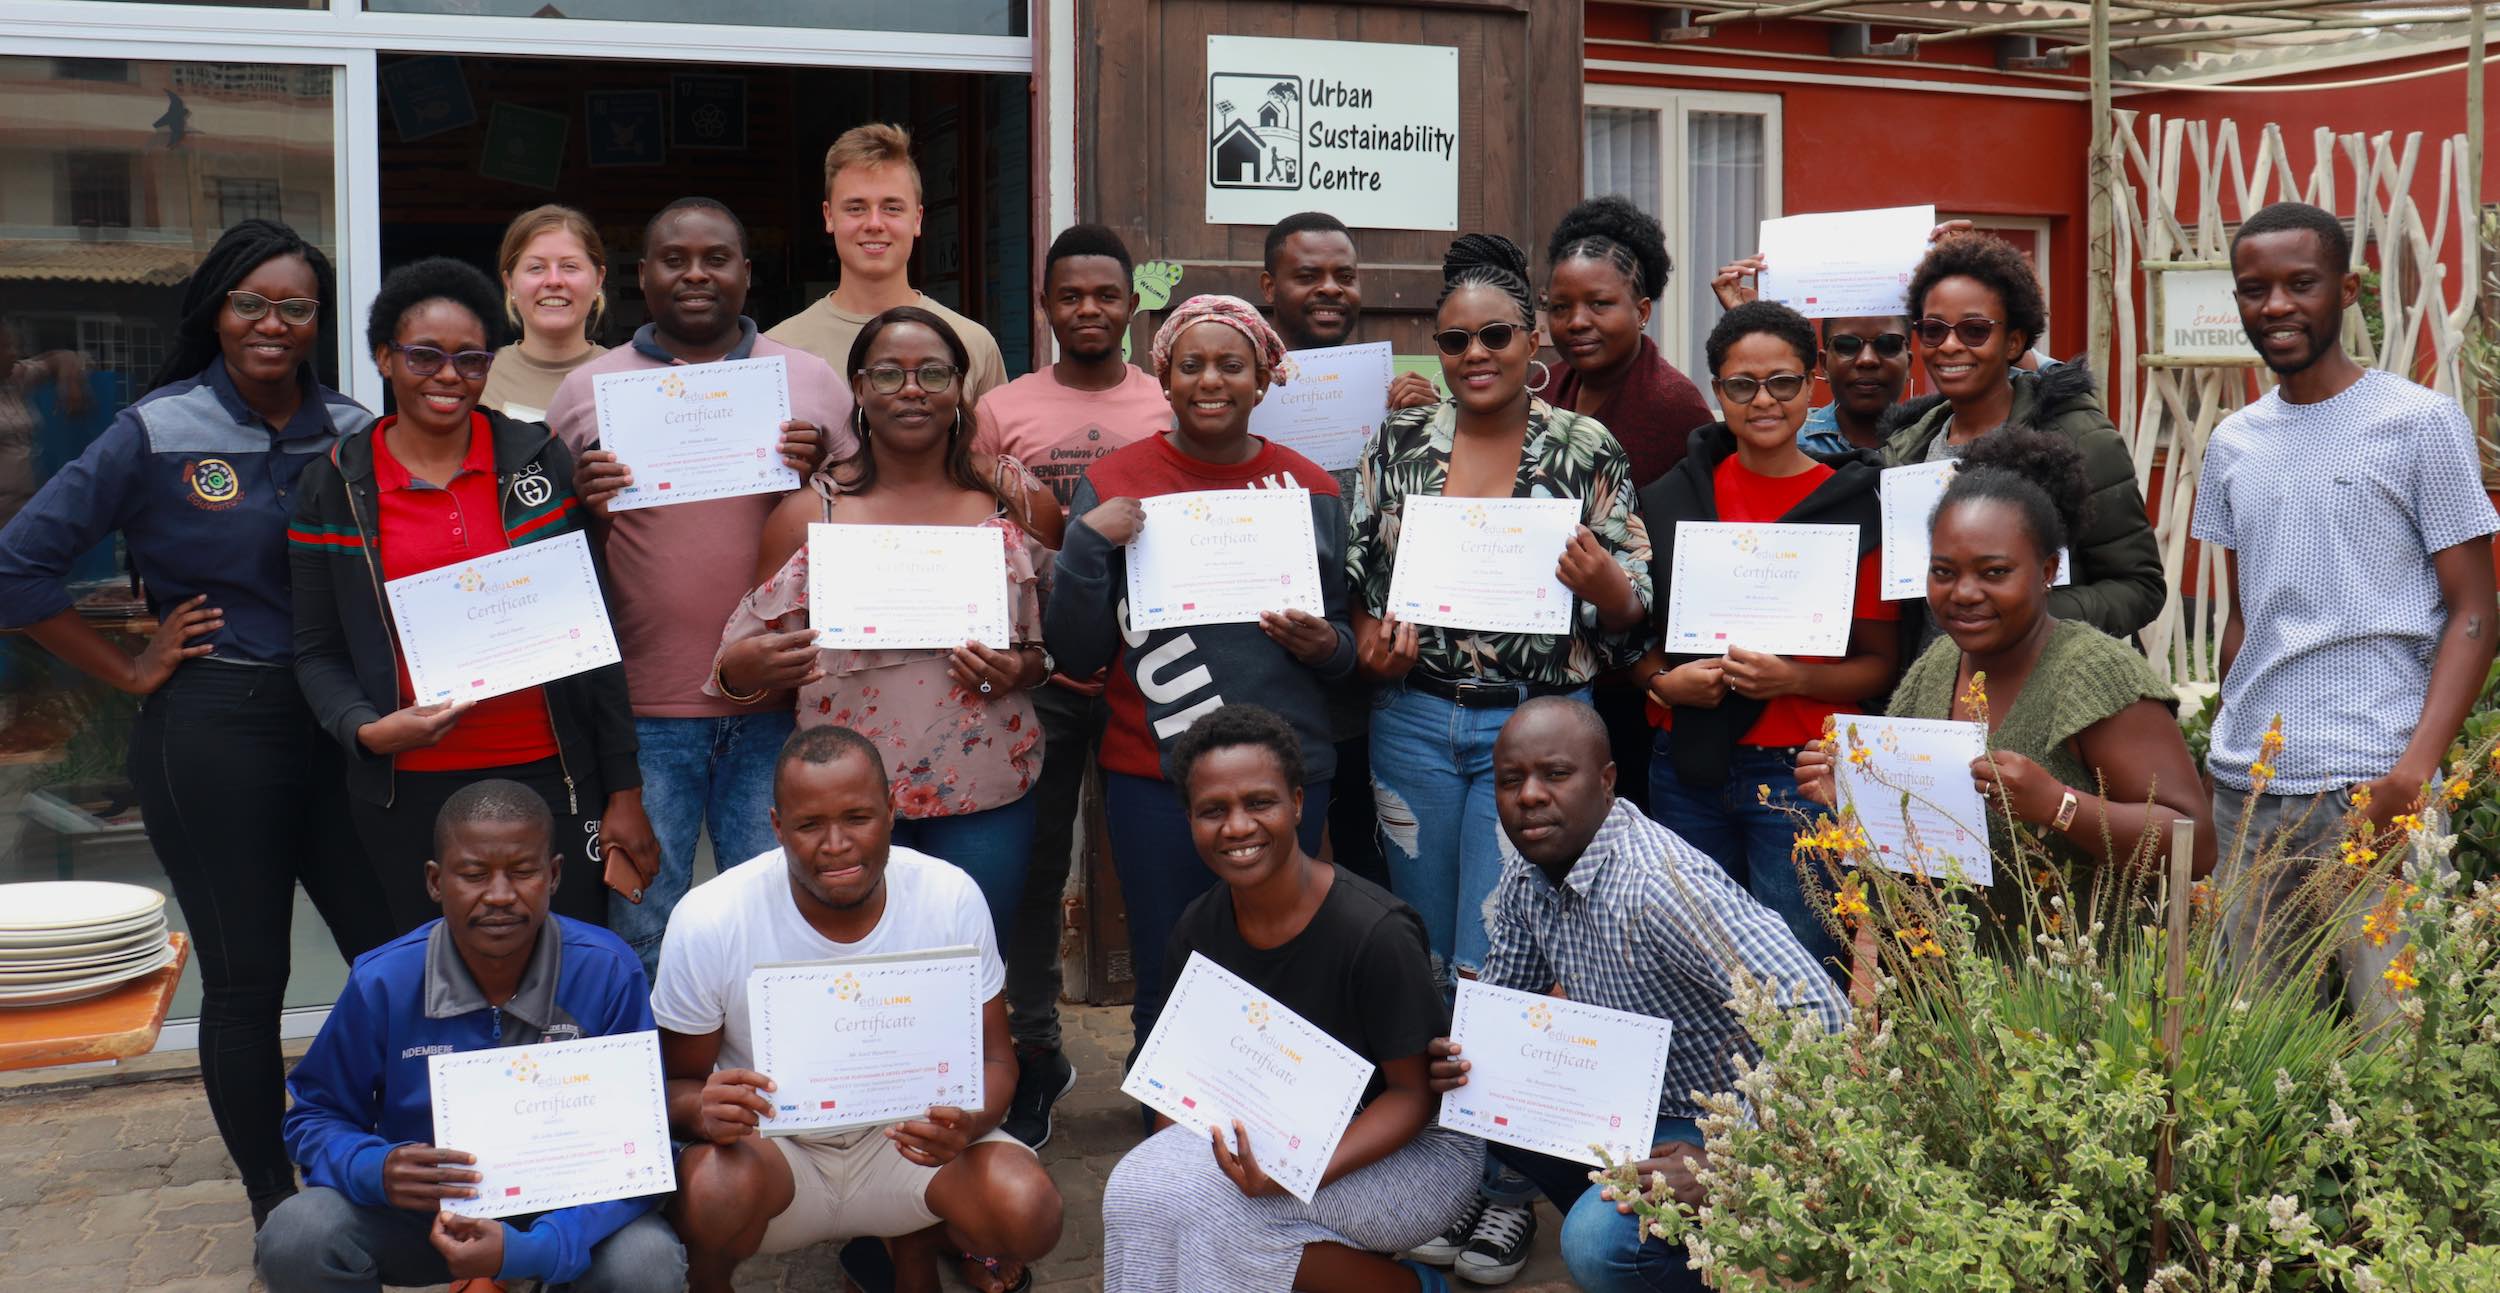 A group shows off their course certificates outside the NaDEET Sustainable Development Centre in Swakopmund.